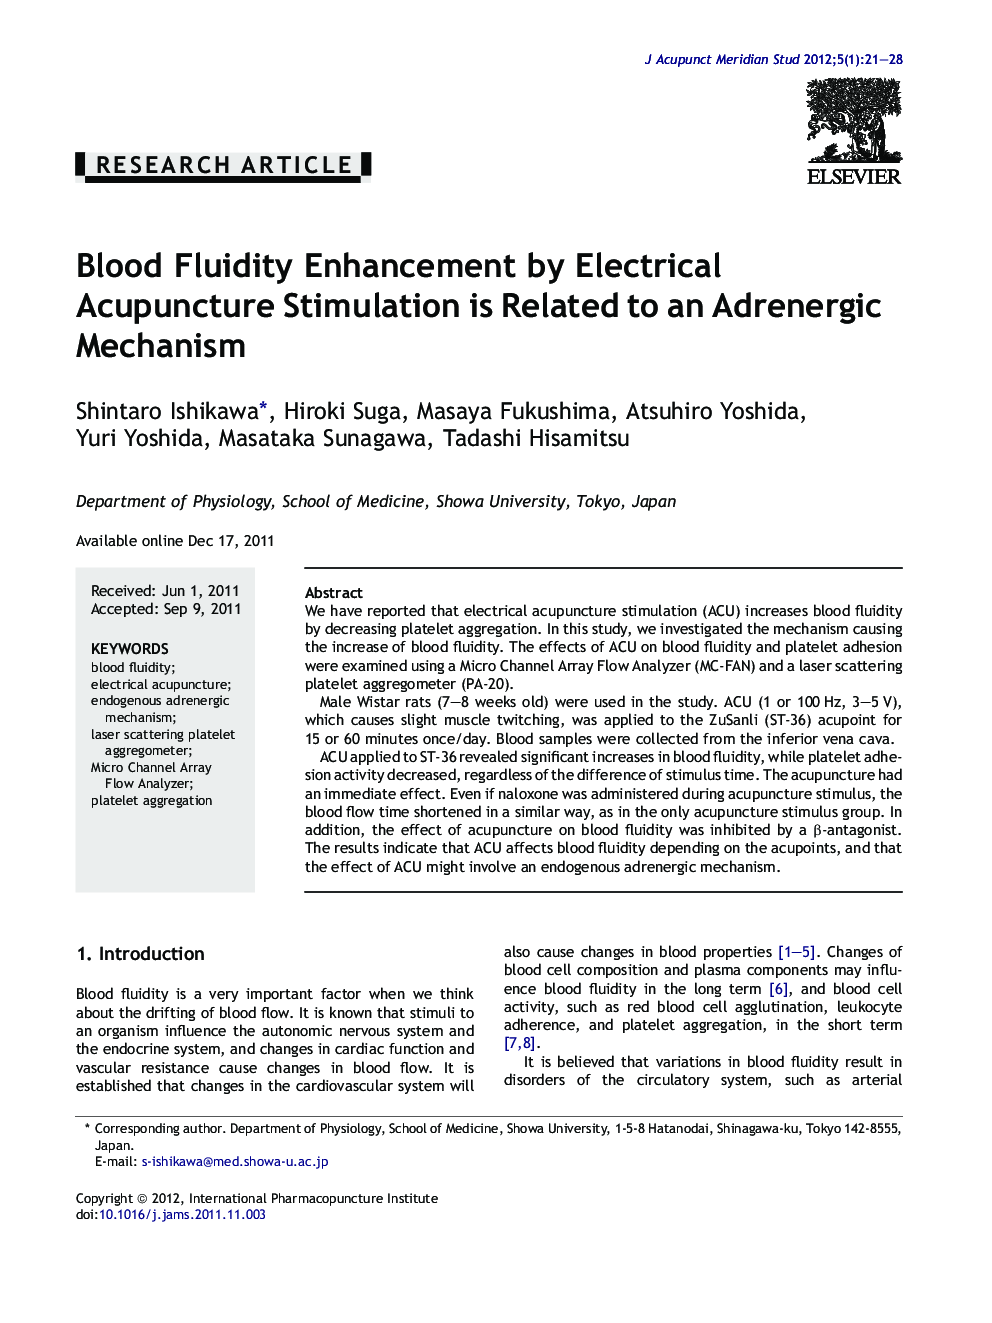 Blood Fluidity Enhancement by Electrical Acupuncture Stimulation is Related to an Adrenergic Mechanism